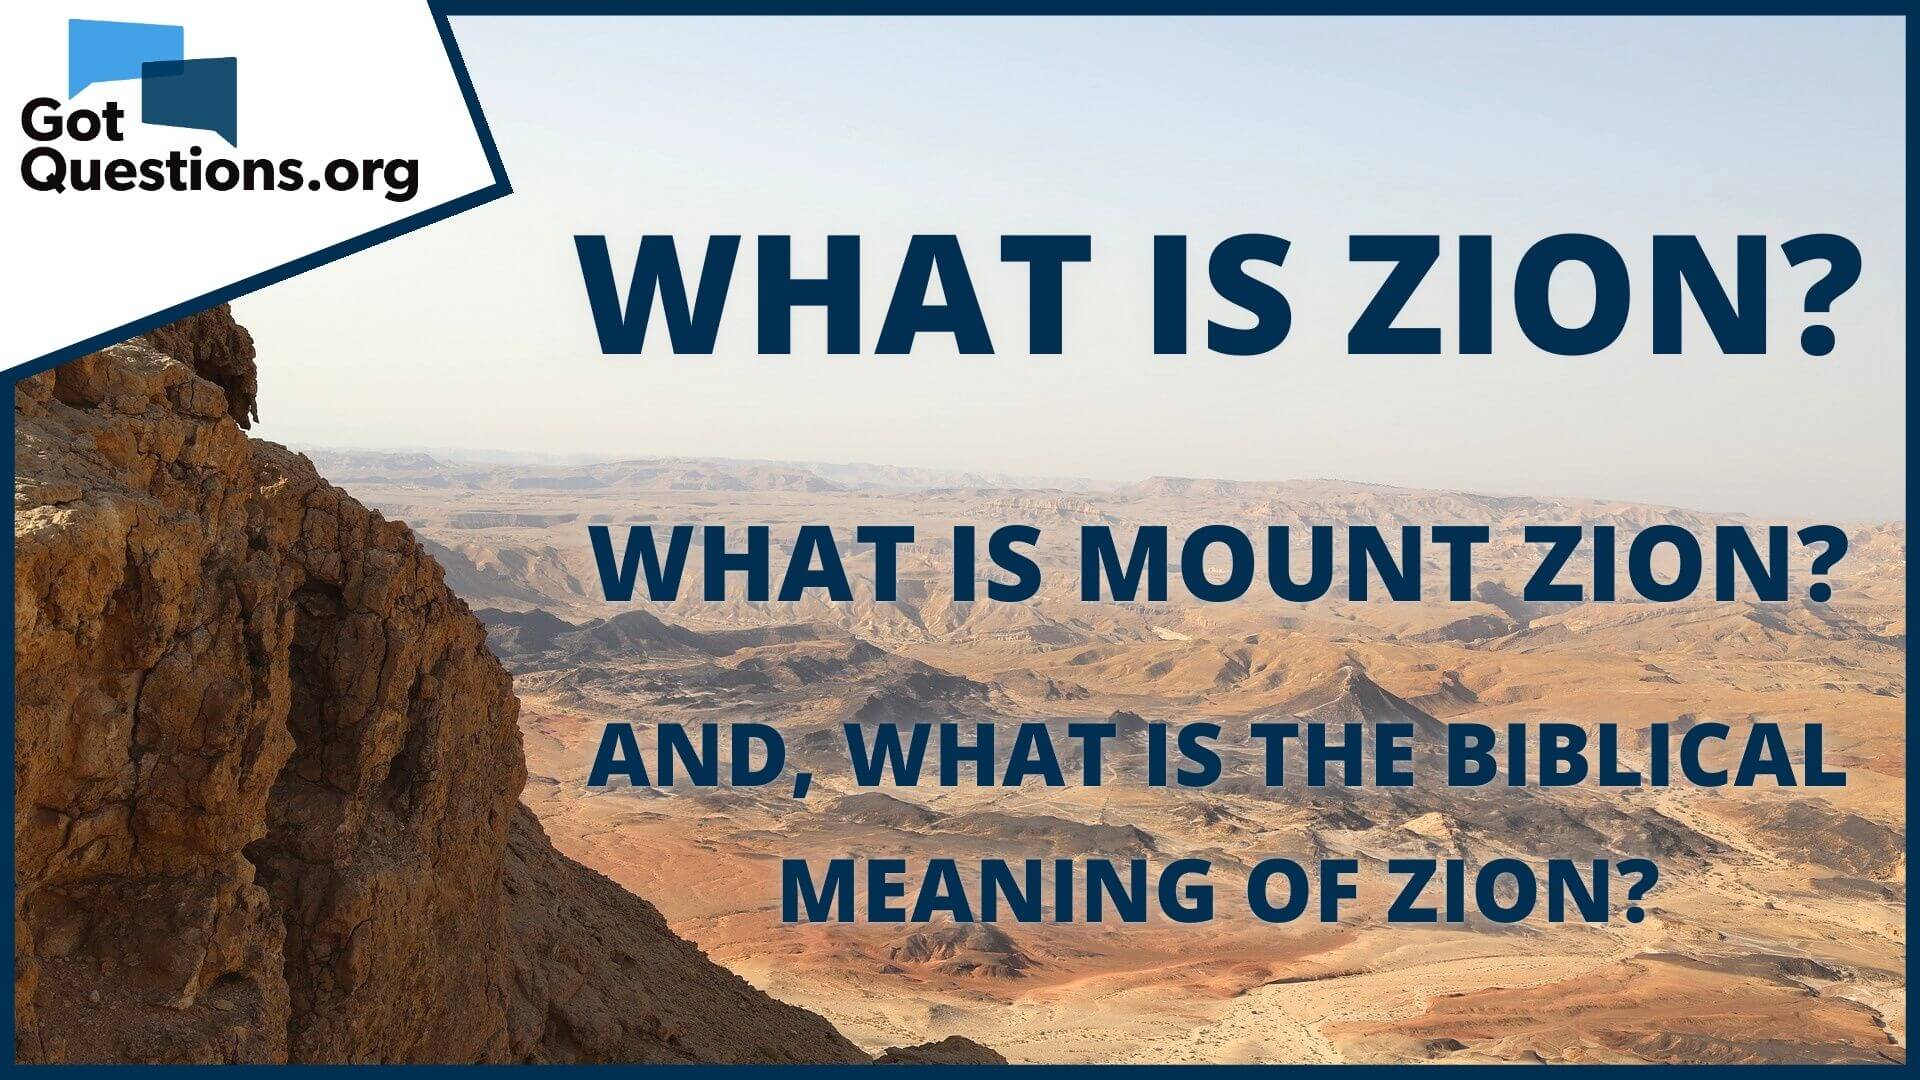 mount zion in the bible